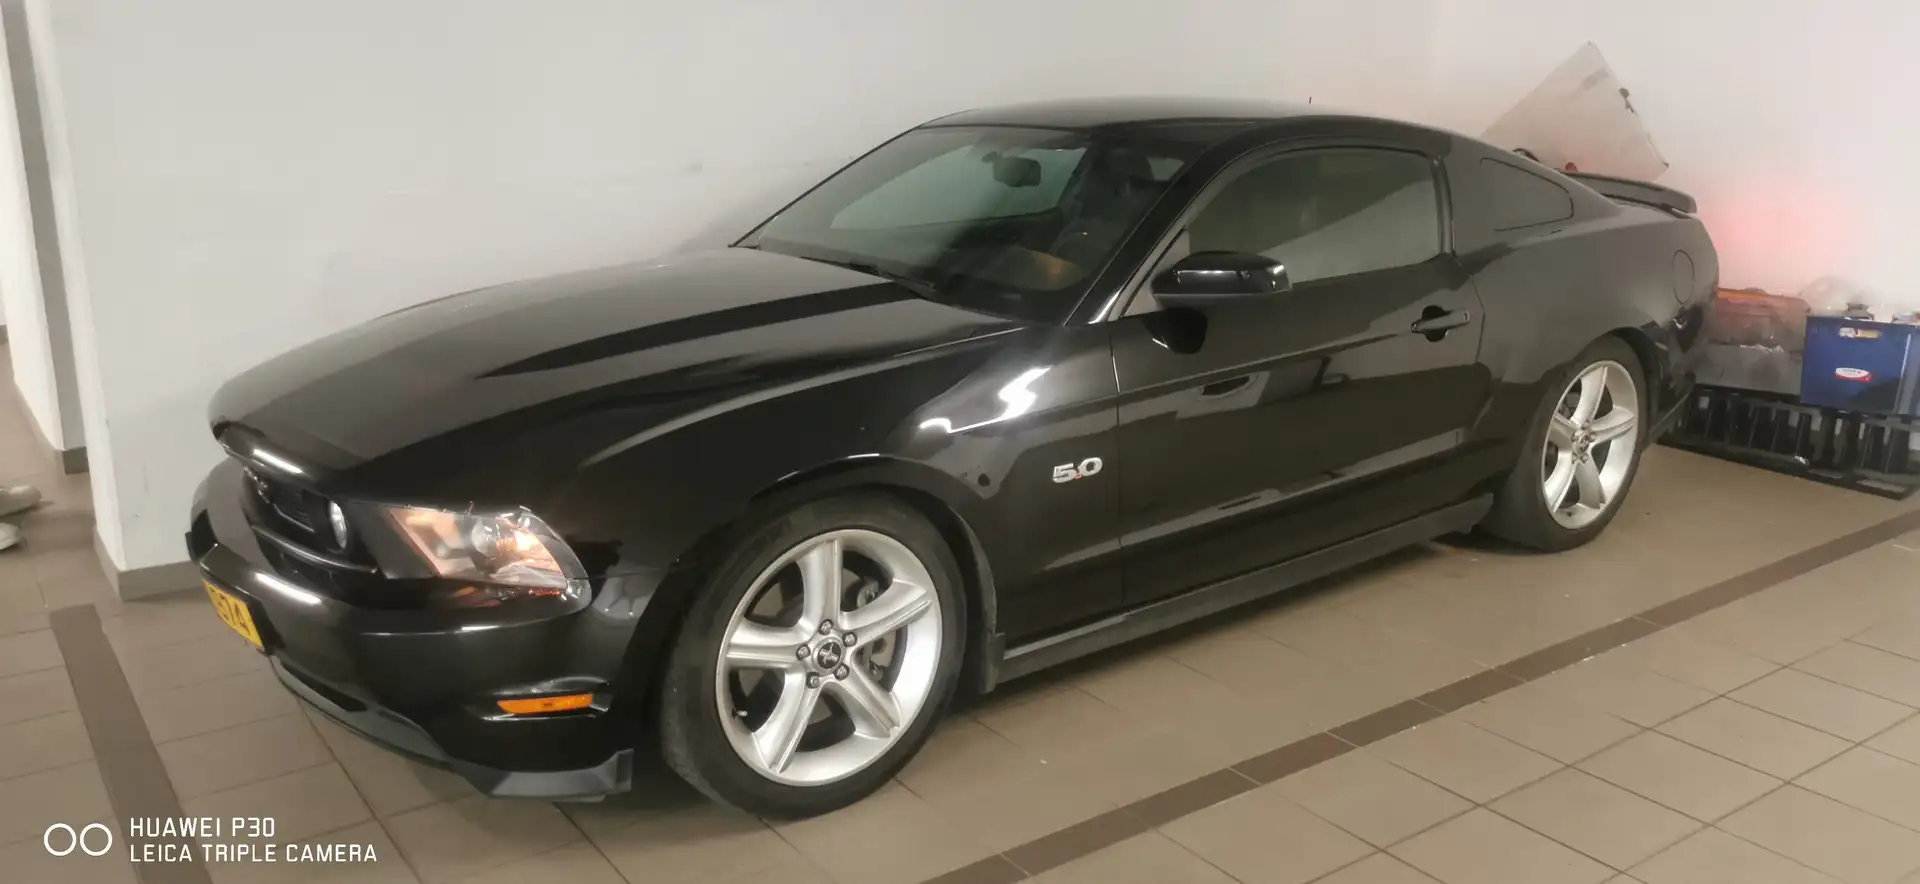 Ford Mustang Gt Black - 2